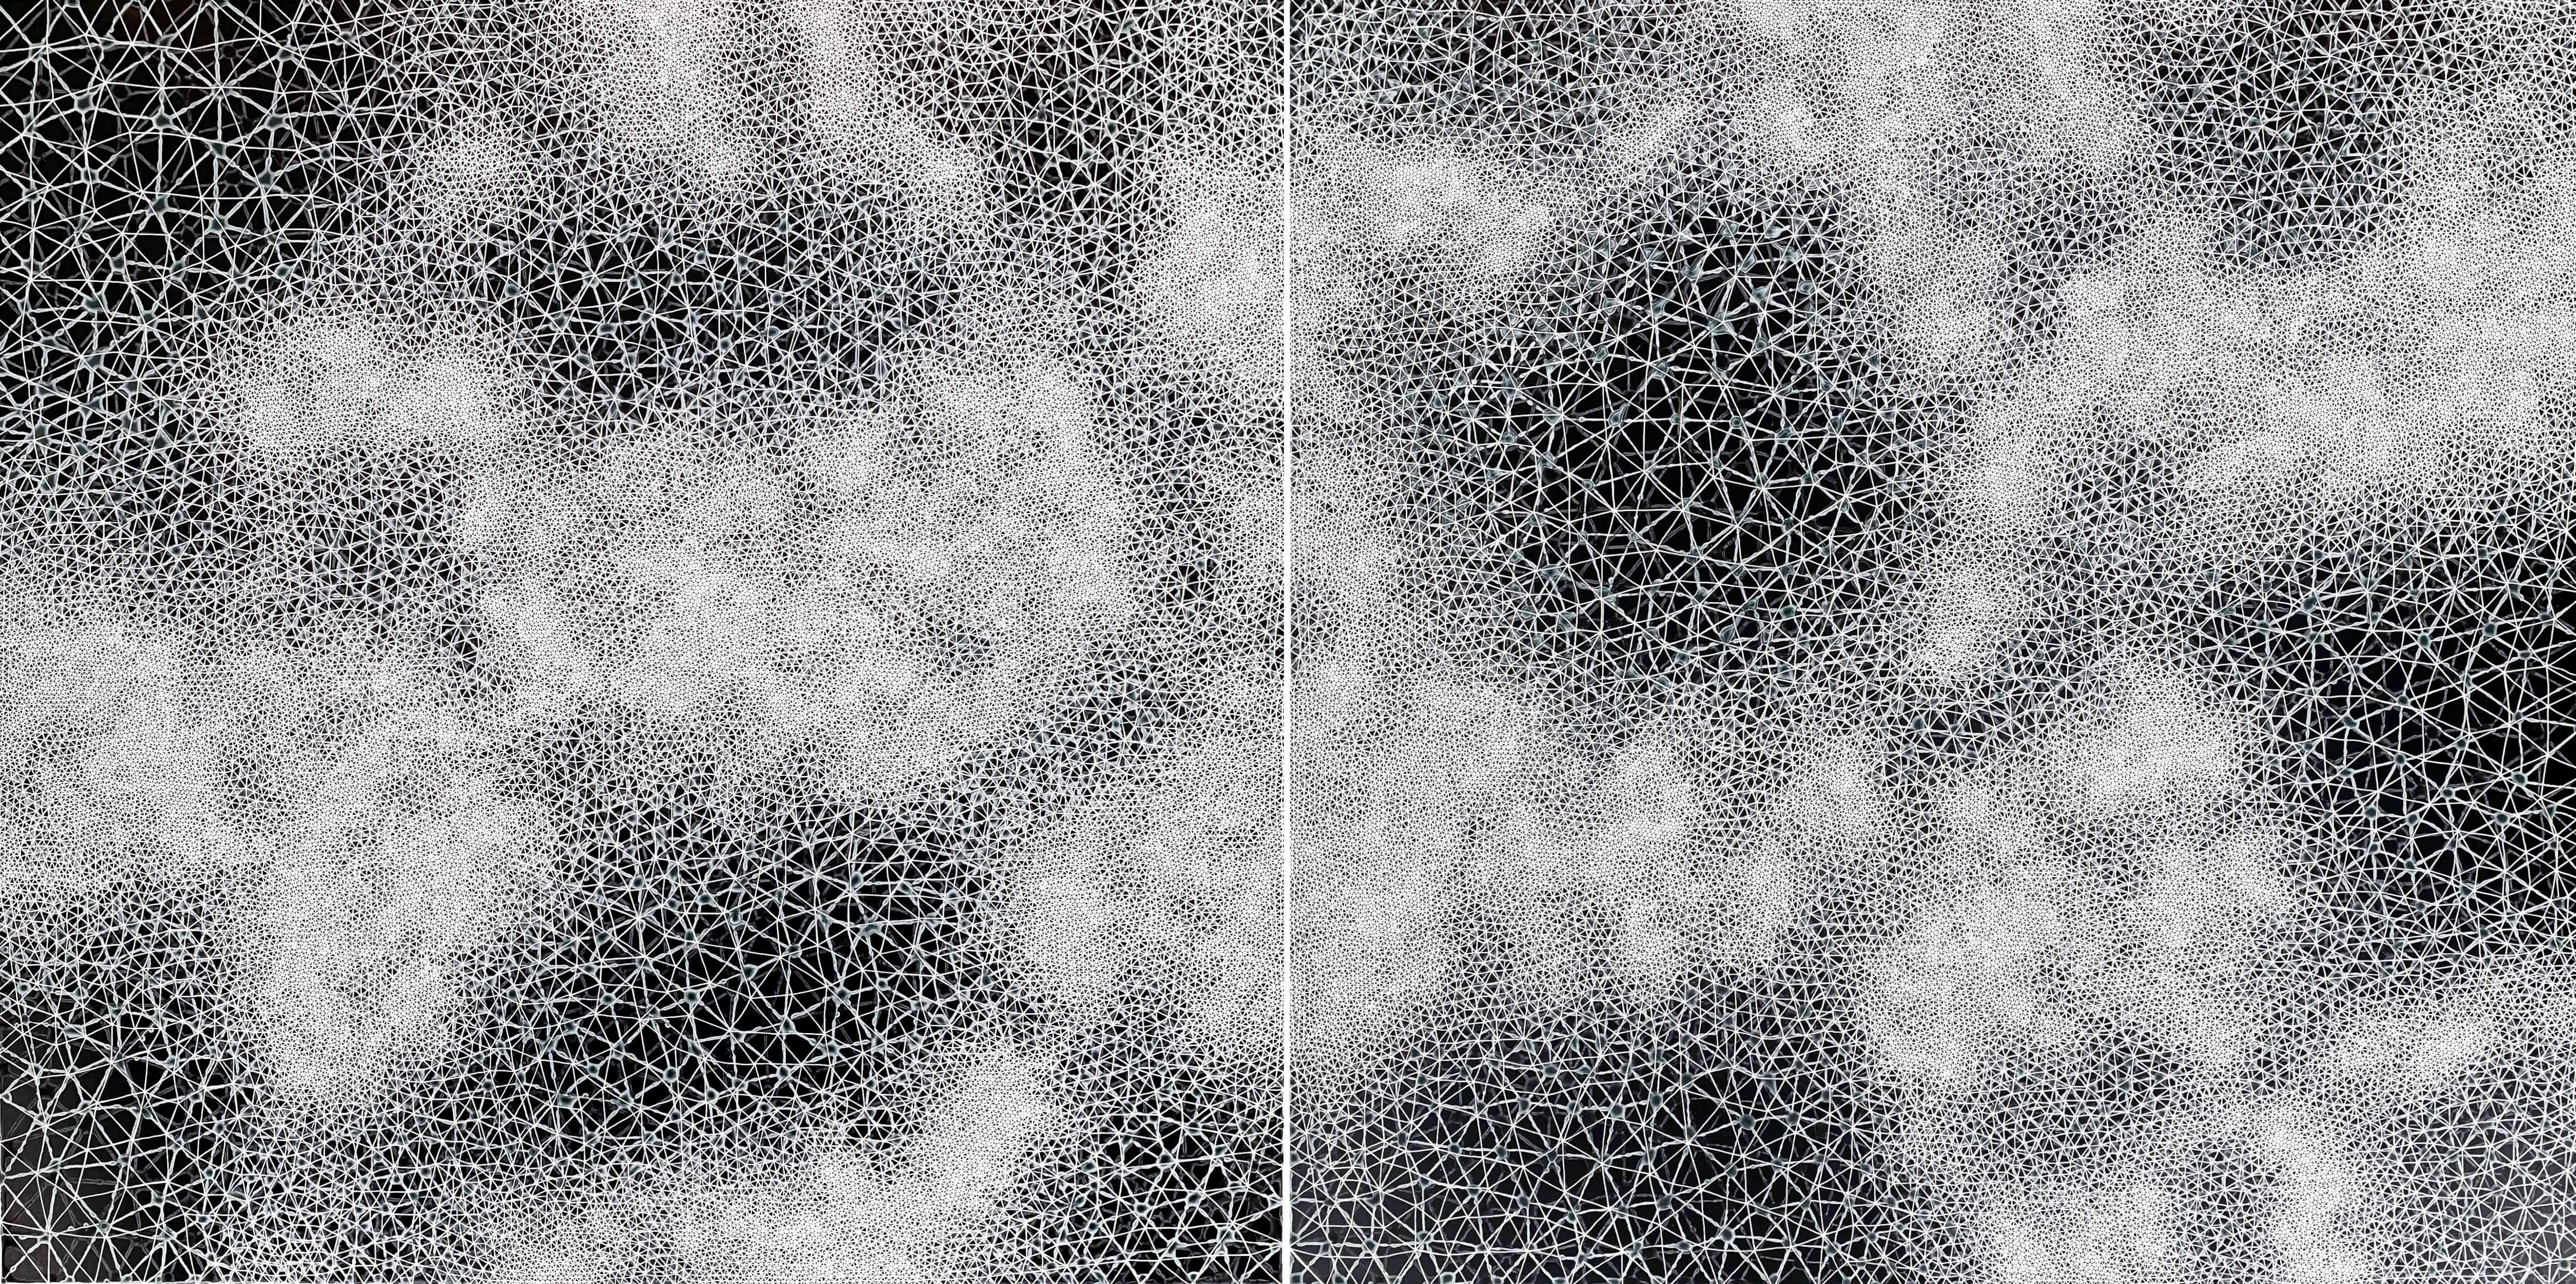 Hadley Radt Abstract Painting - Coherence - black and white abstract geometric diptych painting